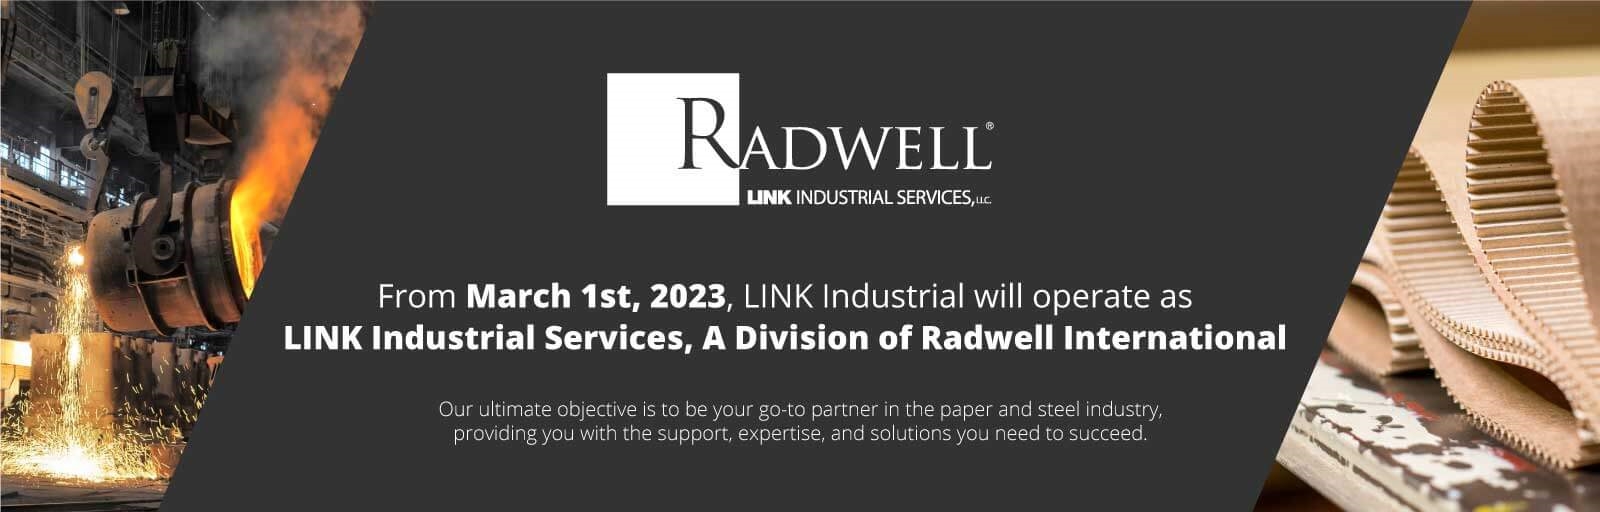 Link Industrial will operate as Link Industrial Services, a Division of Radwell International